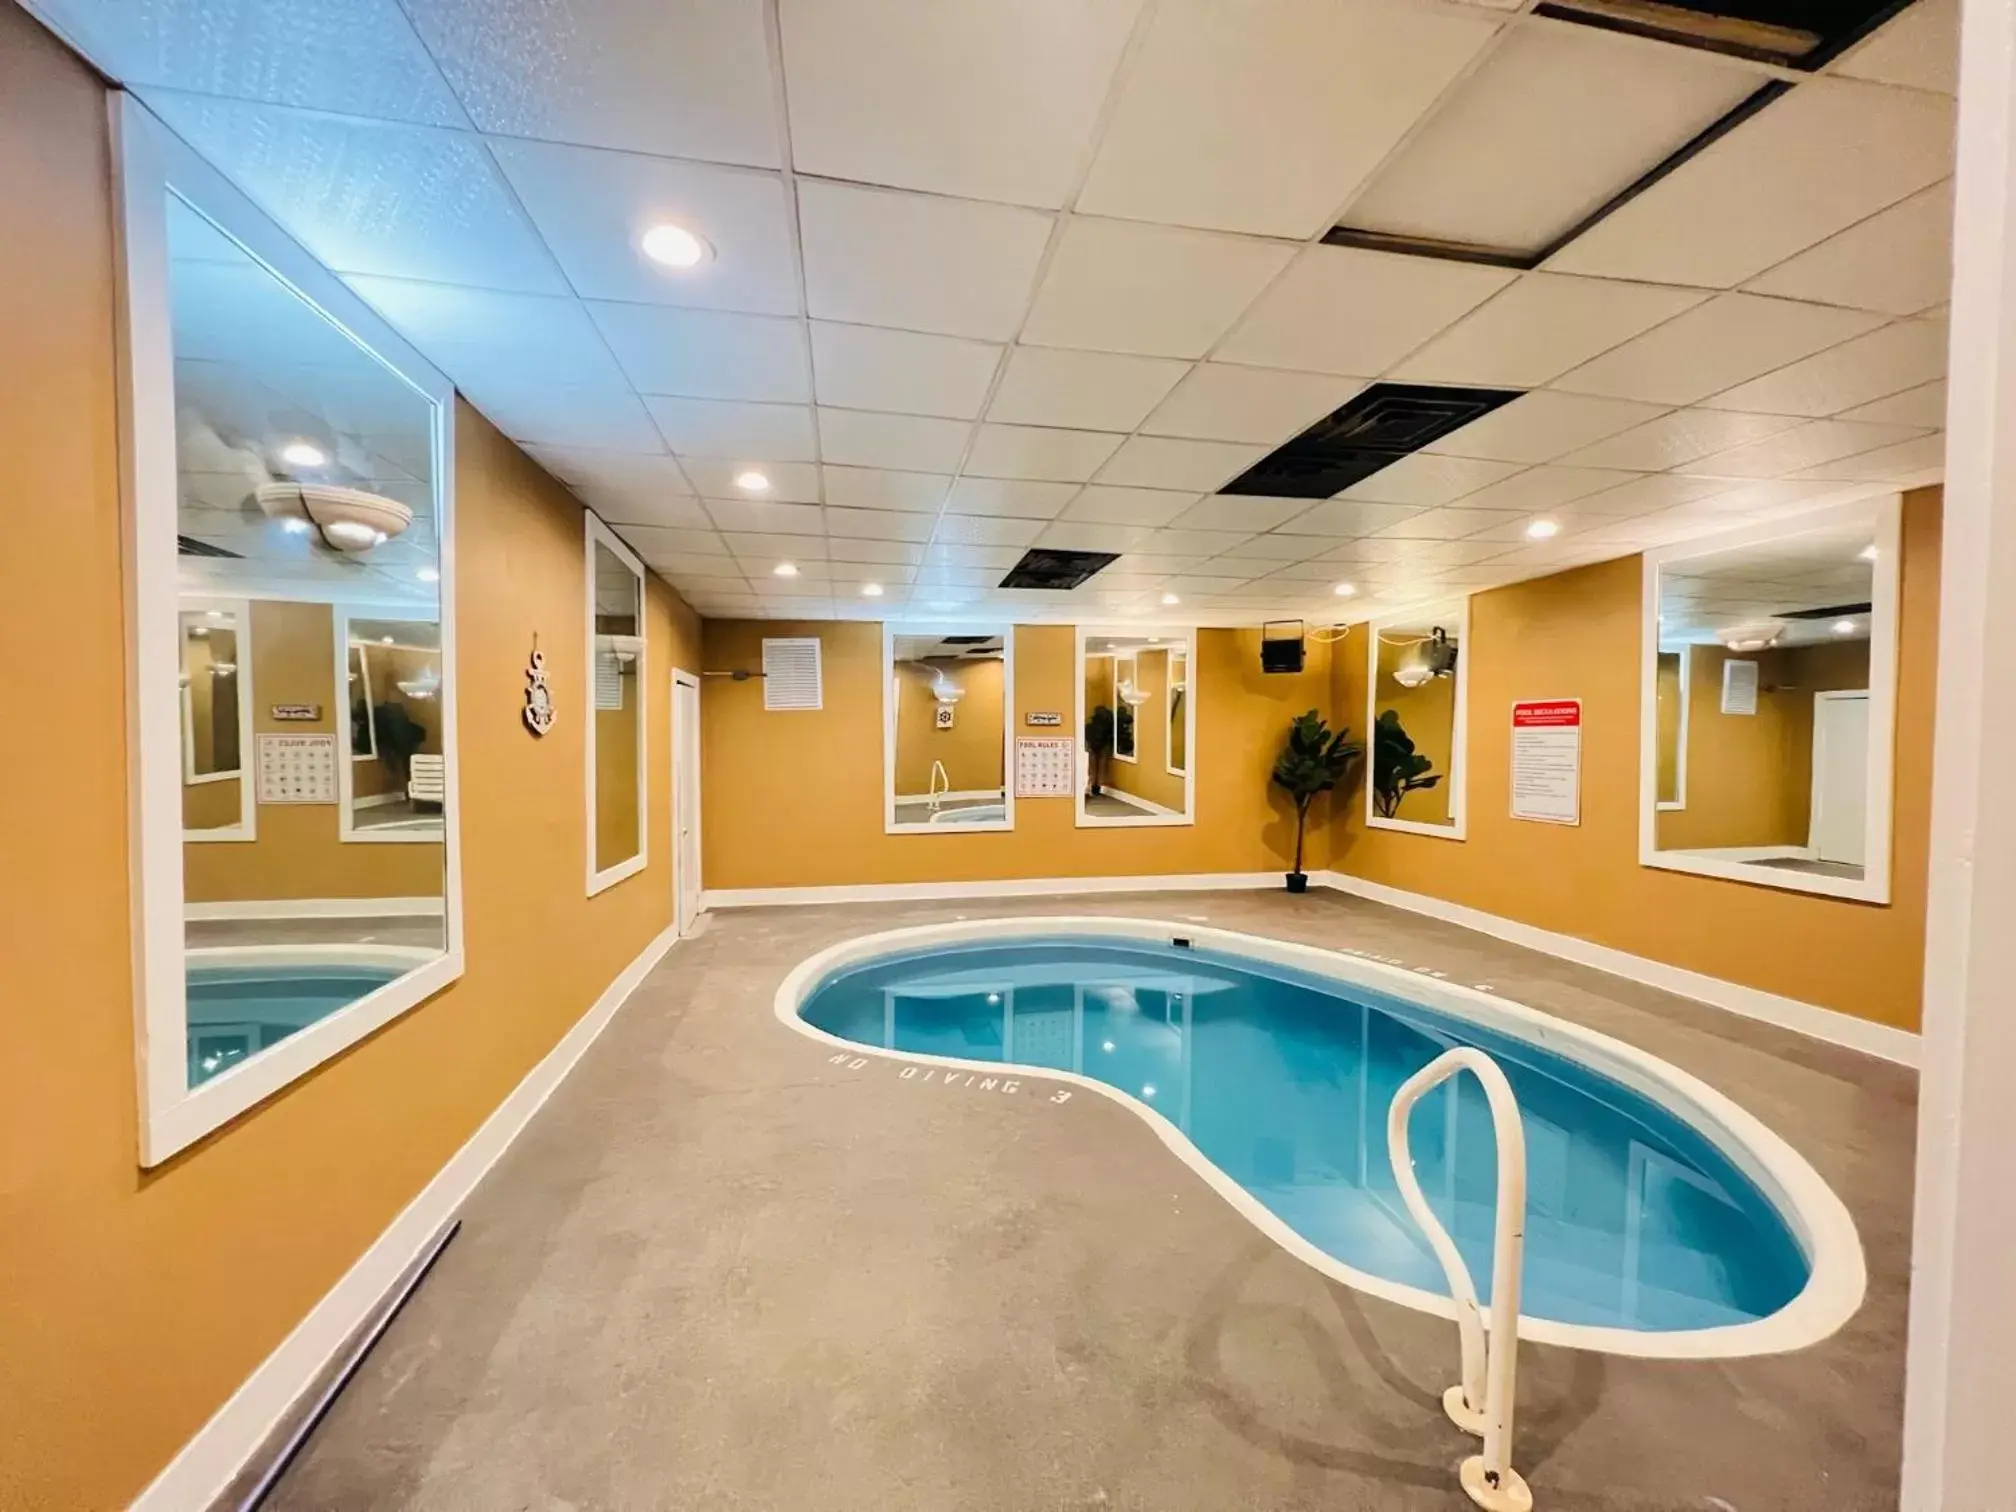 Swimming Pool in Inn of the Dove Romantic Luxury Suites with Jacuzzi & Fireplace at Harrisburg-Hershey, PA